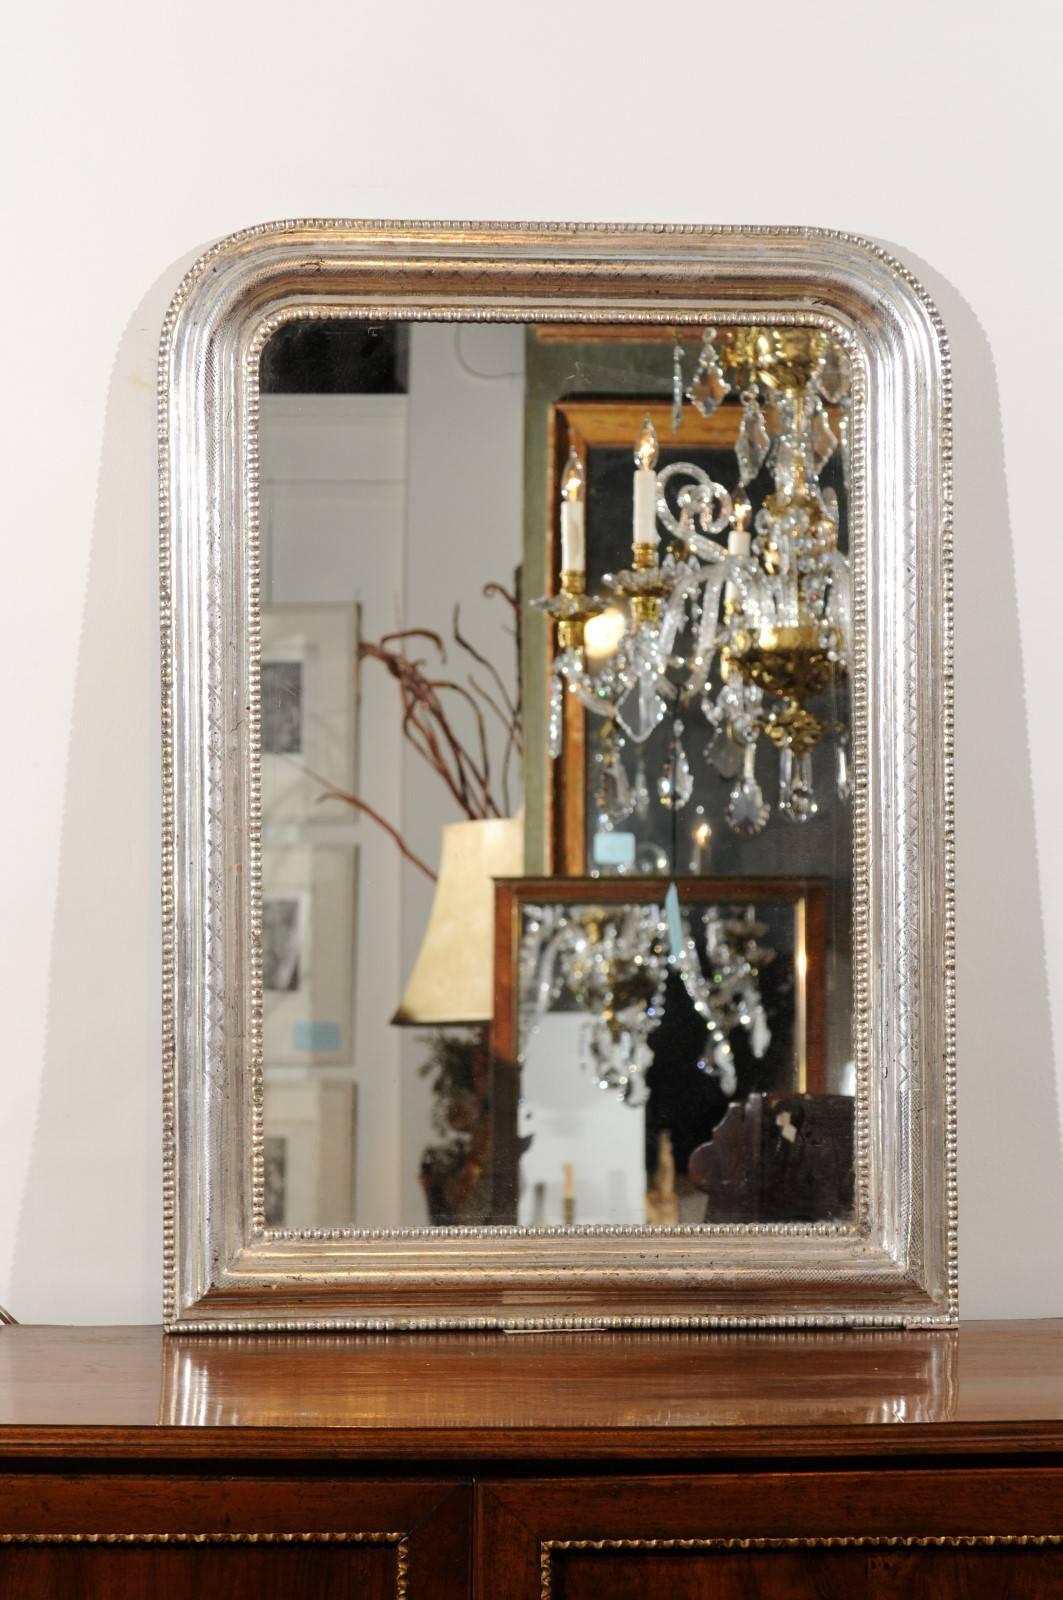 A French small size silver gilt Louis-Philippe mirror with beaded motifs from the late 19th century. This French Louis-Philippe style mirror was born in the later years of the 19th century, at a time when France was revisiting the various styles of